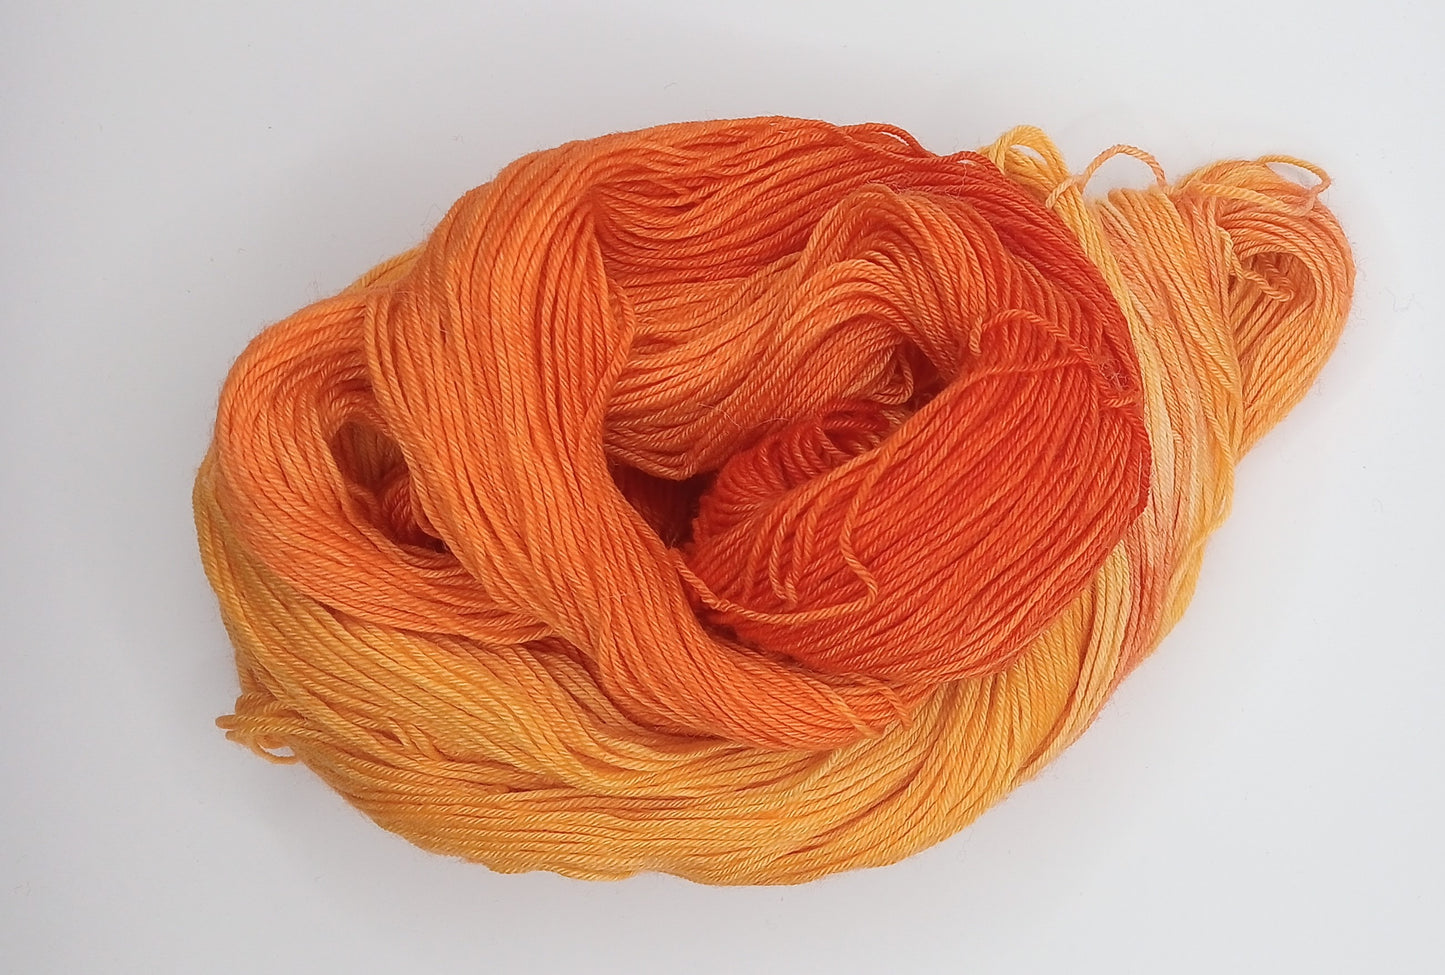 100G hand dyed Bluefaced Leicester/Nylon High Twist sock yarn - "Tequilla Sunrise"